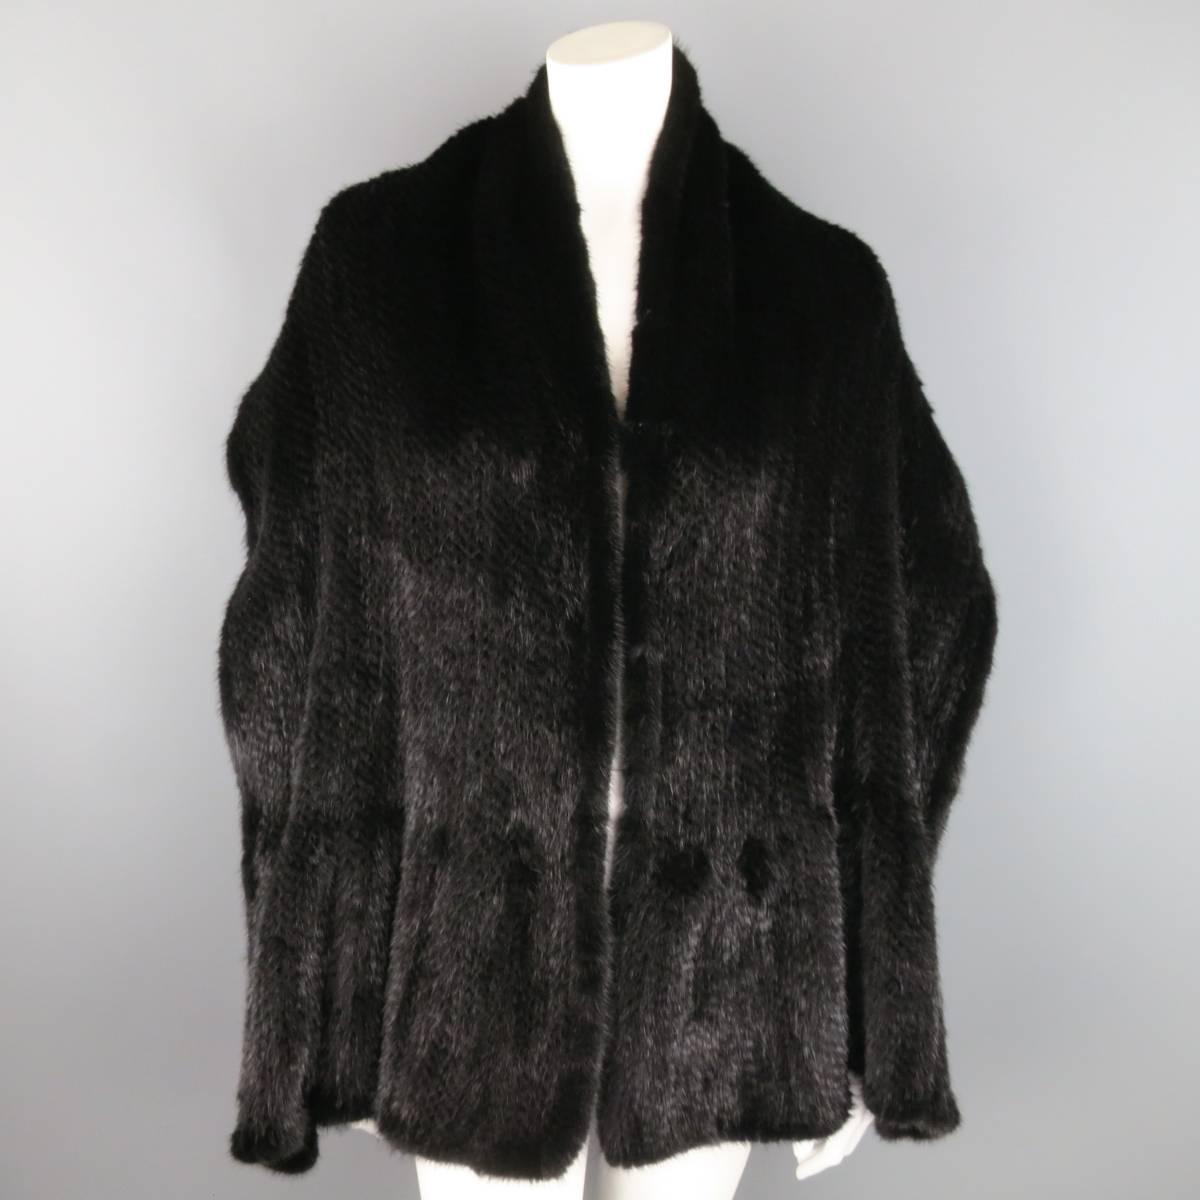 Classic scarf stole by SAKS FITH AVE Fur Salon in a knitted black mink featuring a hook eye closures at front.
 
Excellent Pre-Owned Condition.
 
70 x 24 in.
